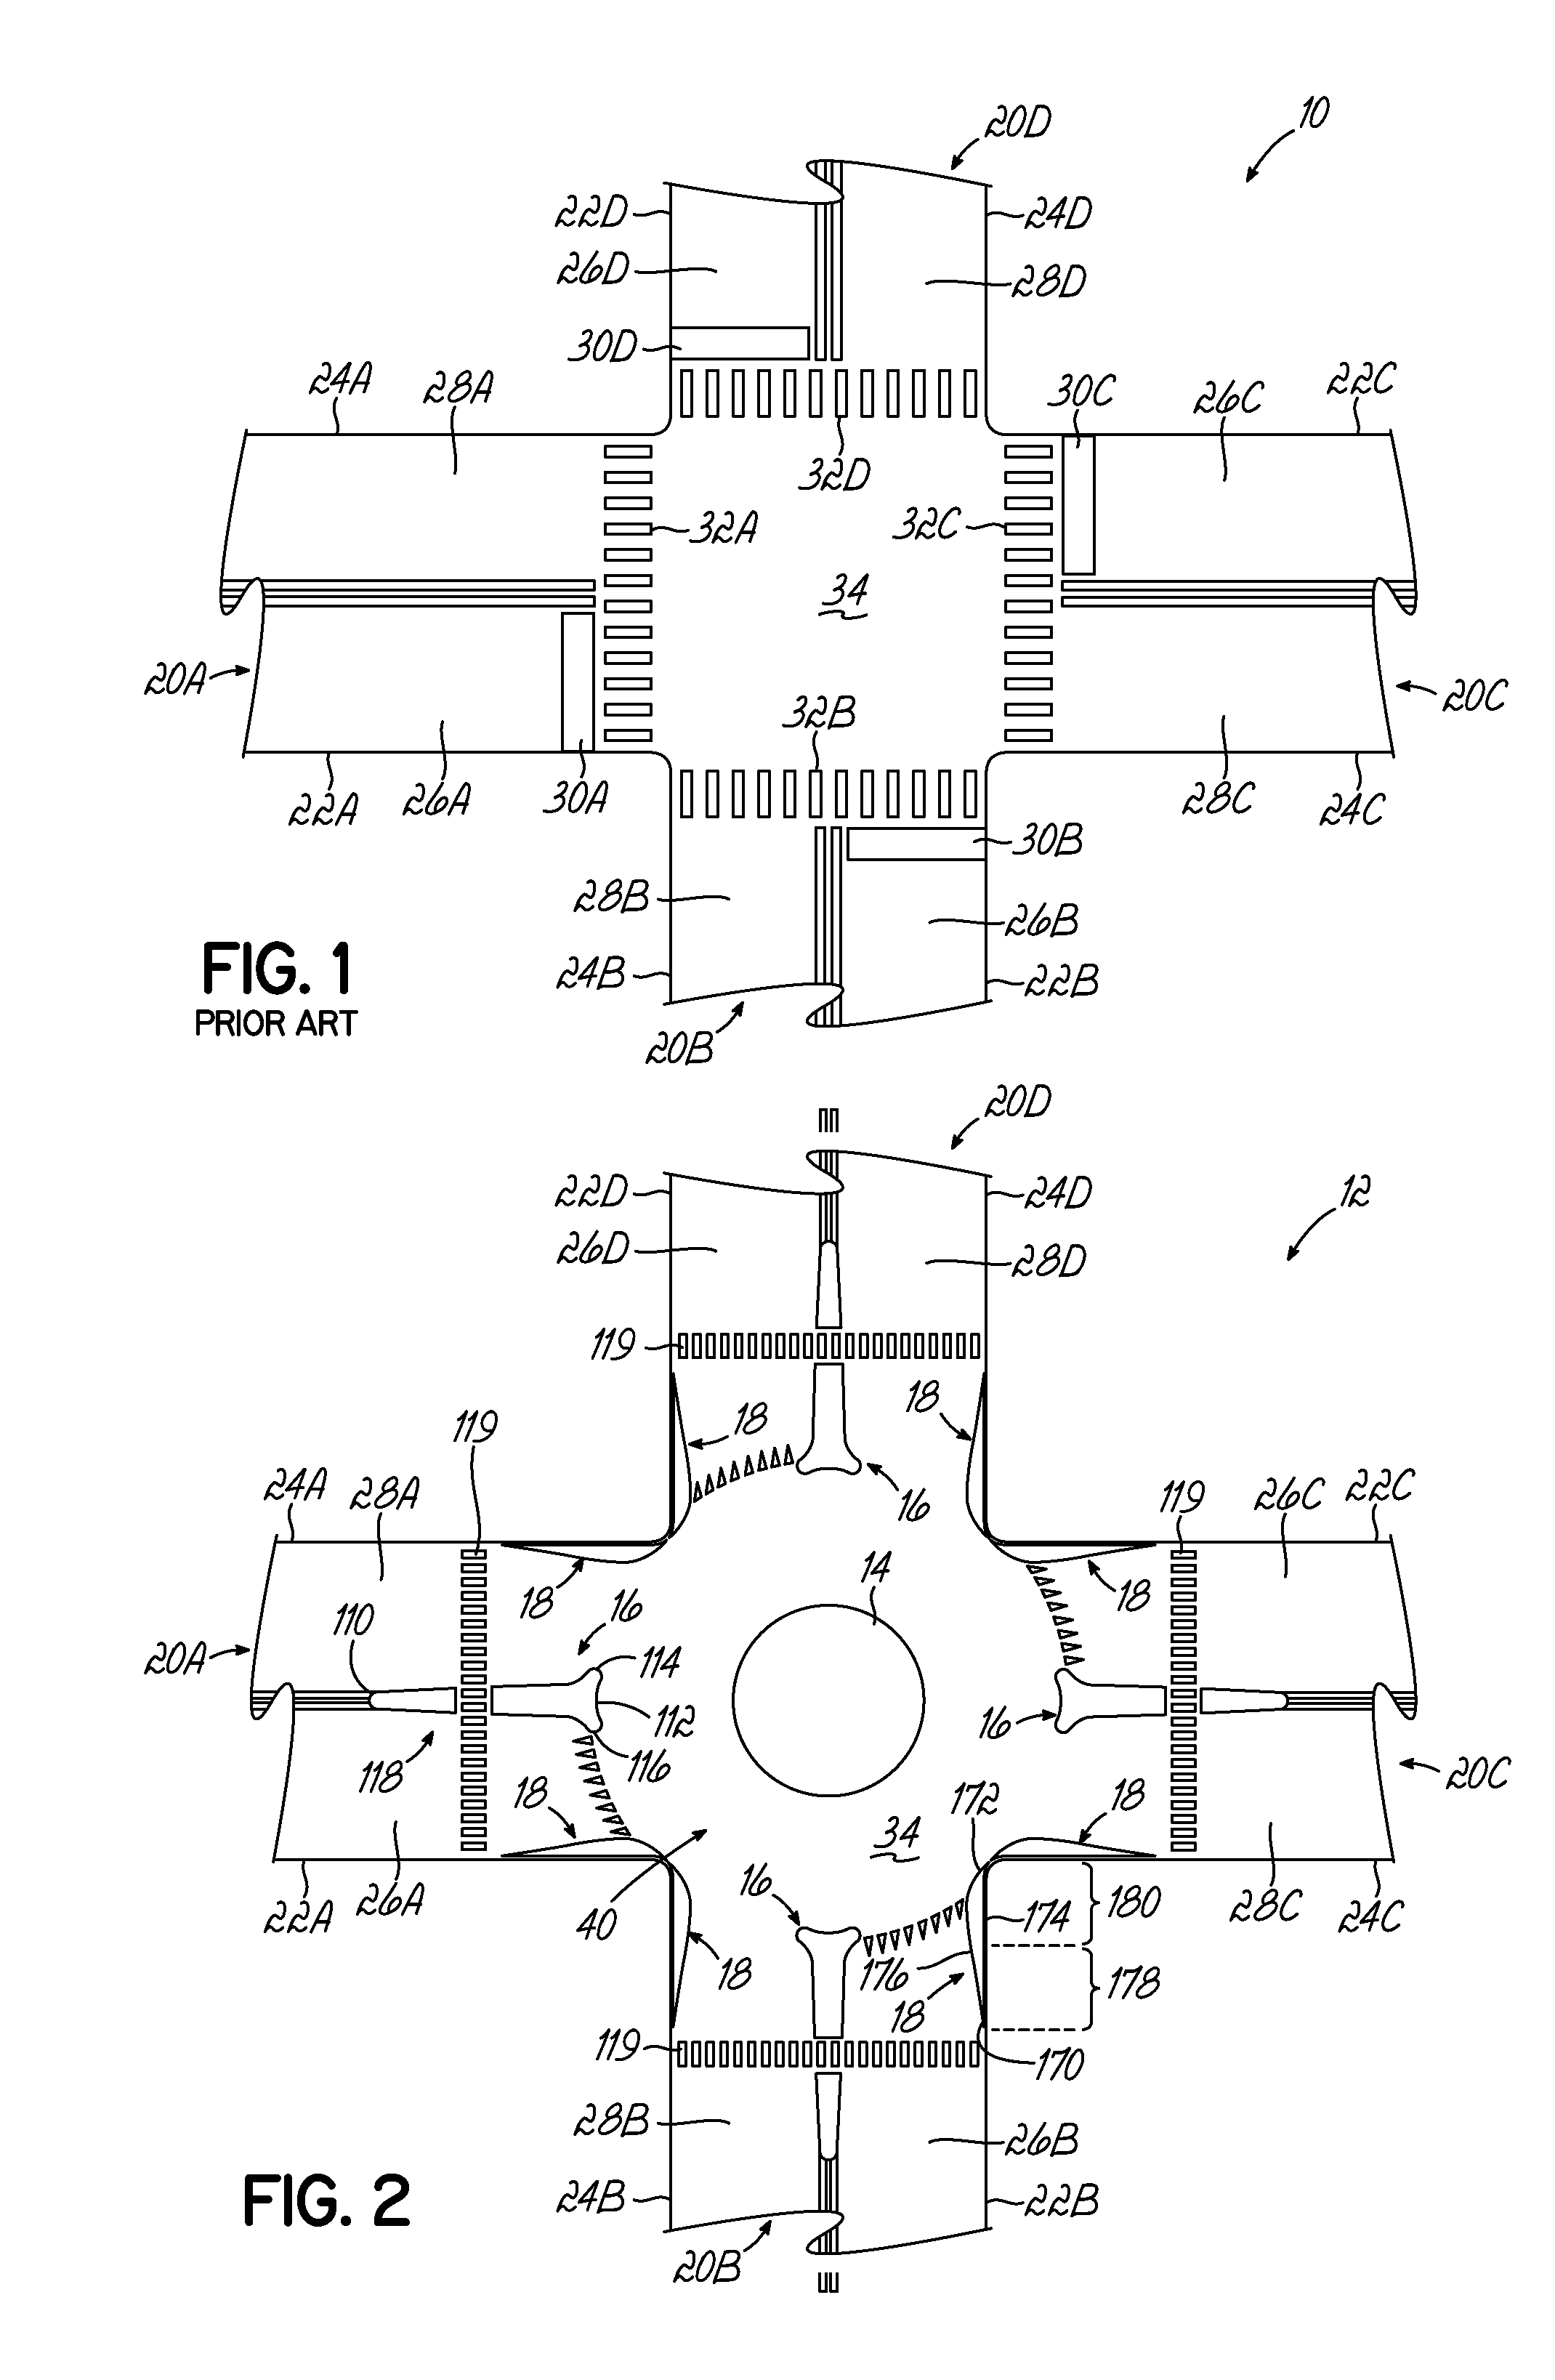 Systems for converting an existing traffic intersection into an intersection having a roundabout, and related methods